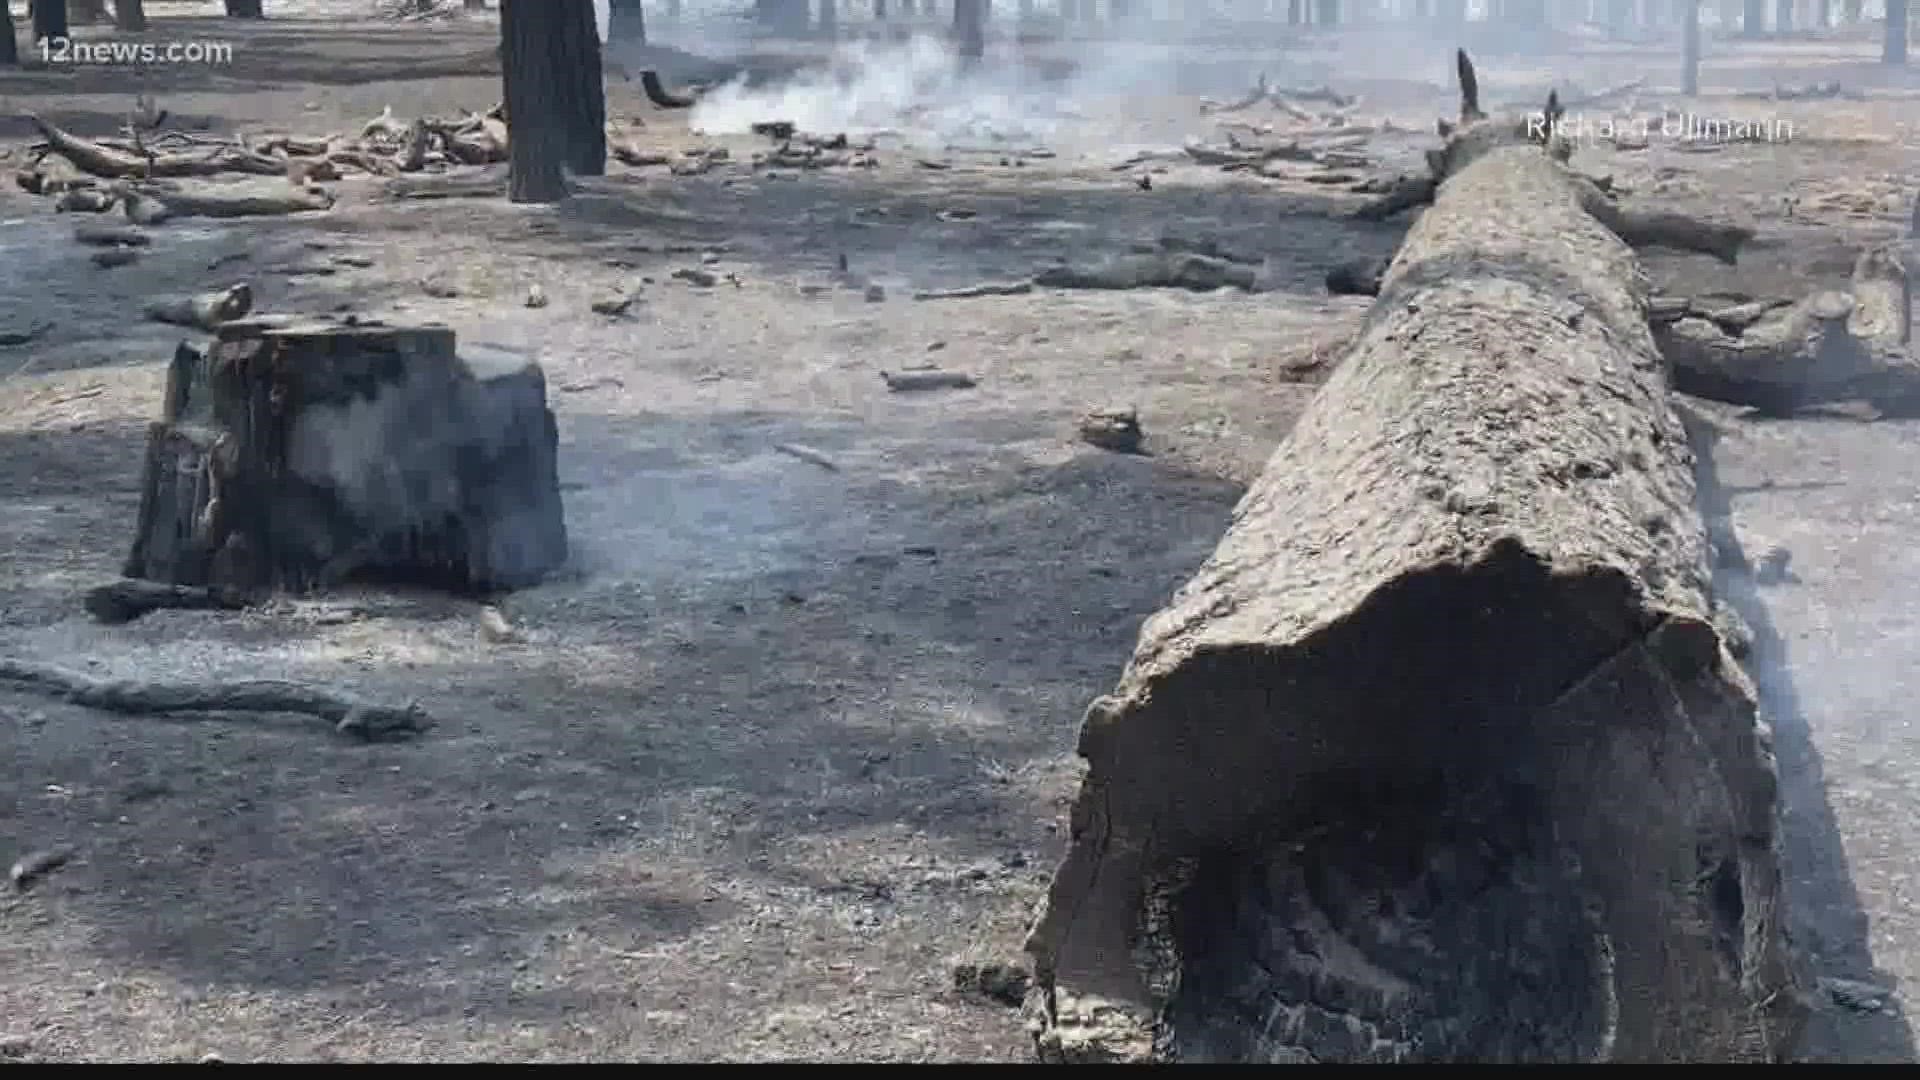 The wildfire in Northern Arizona burned throughout the park, but the damage was less than what rangers thought it would be. Here's what was left after the blaze.